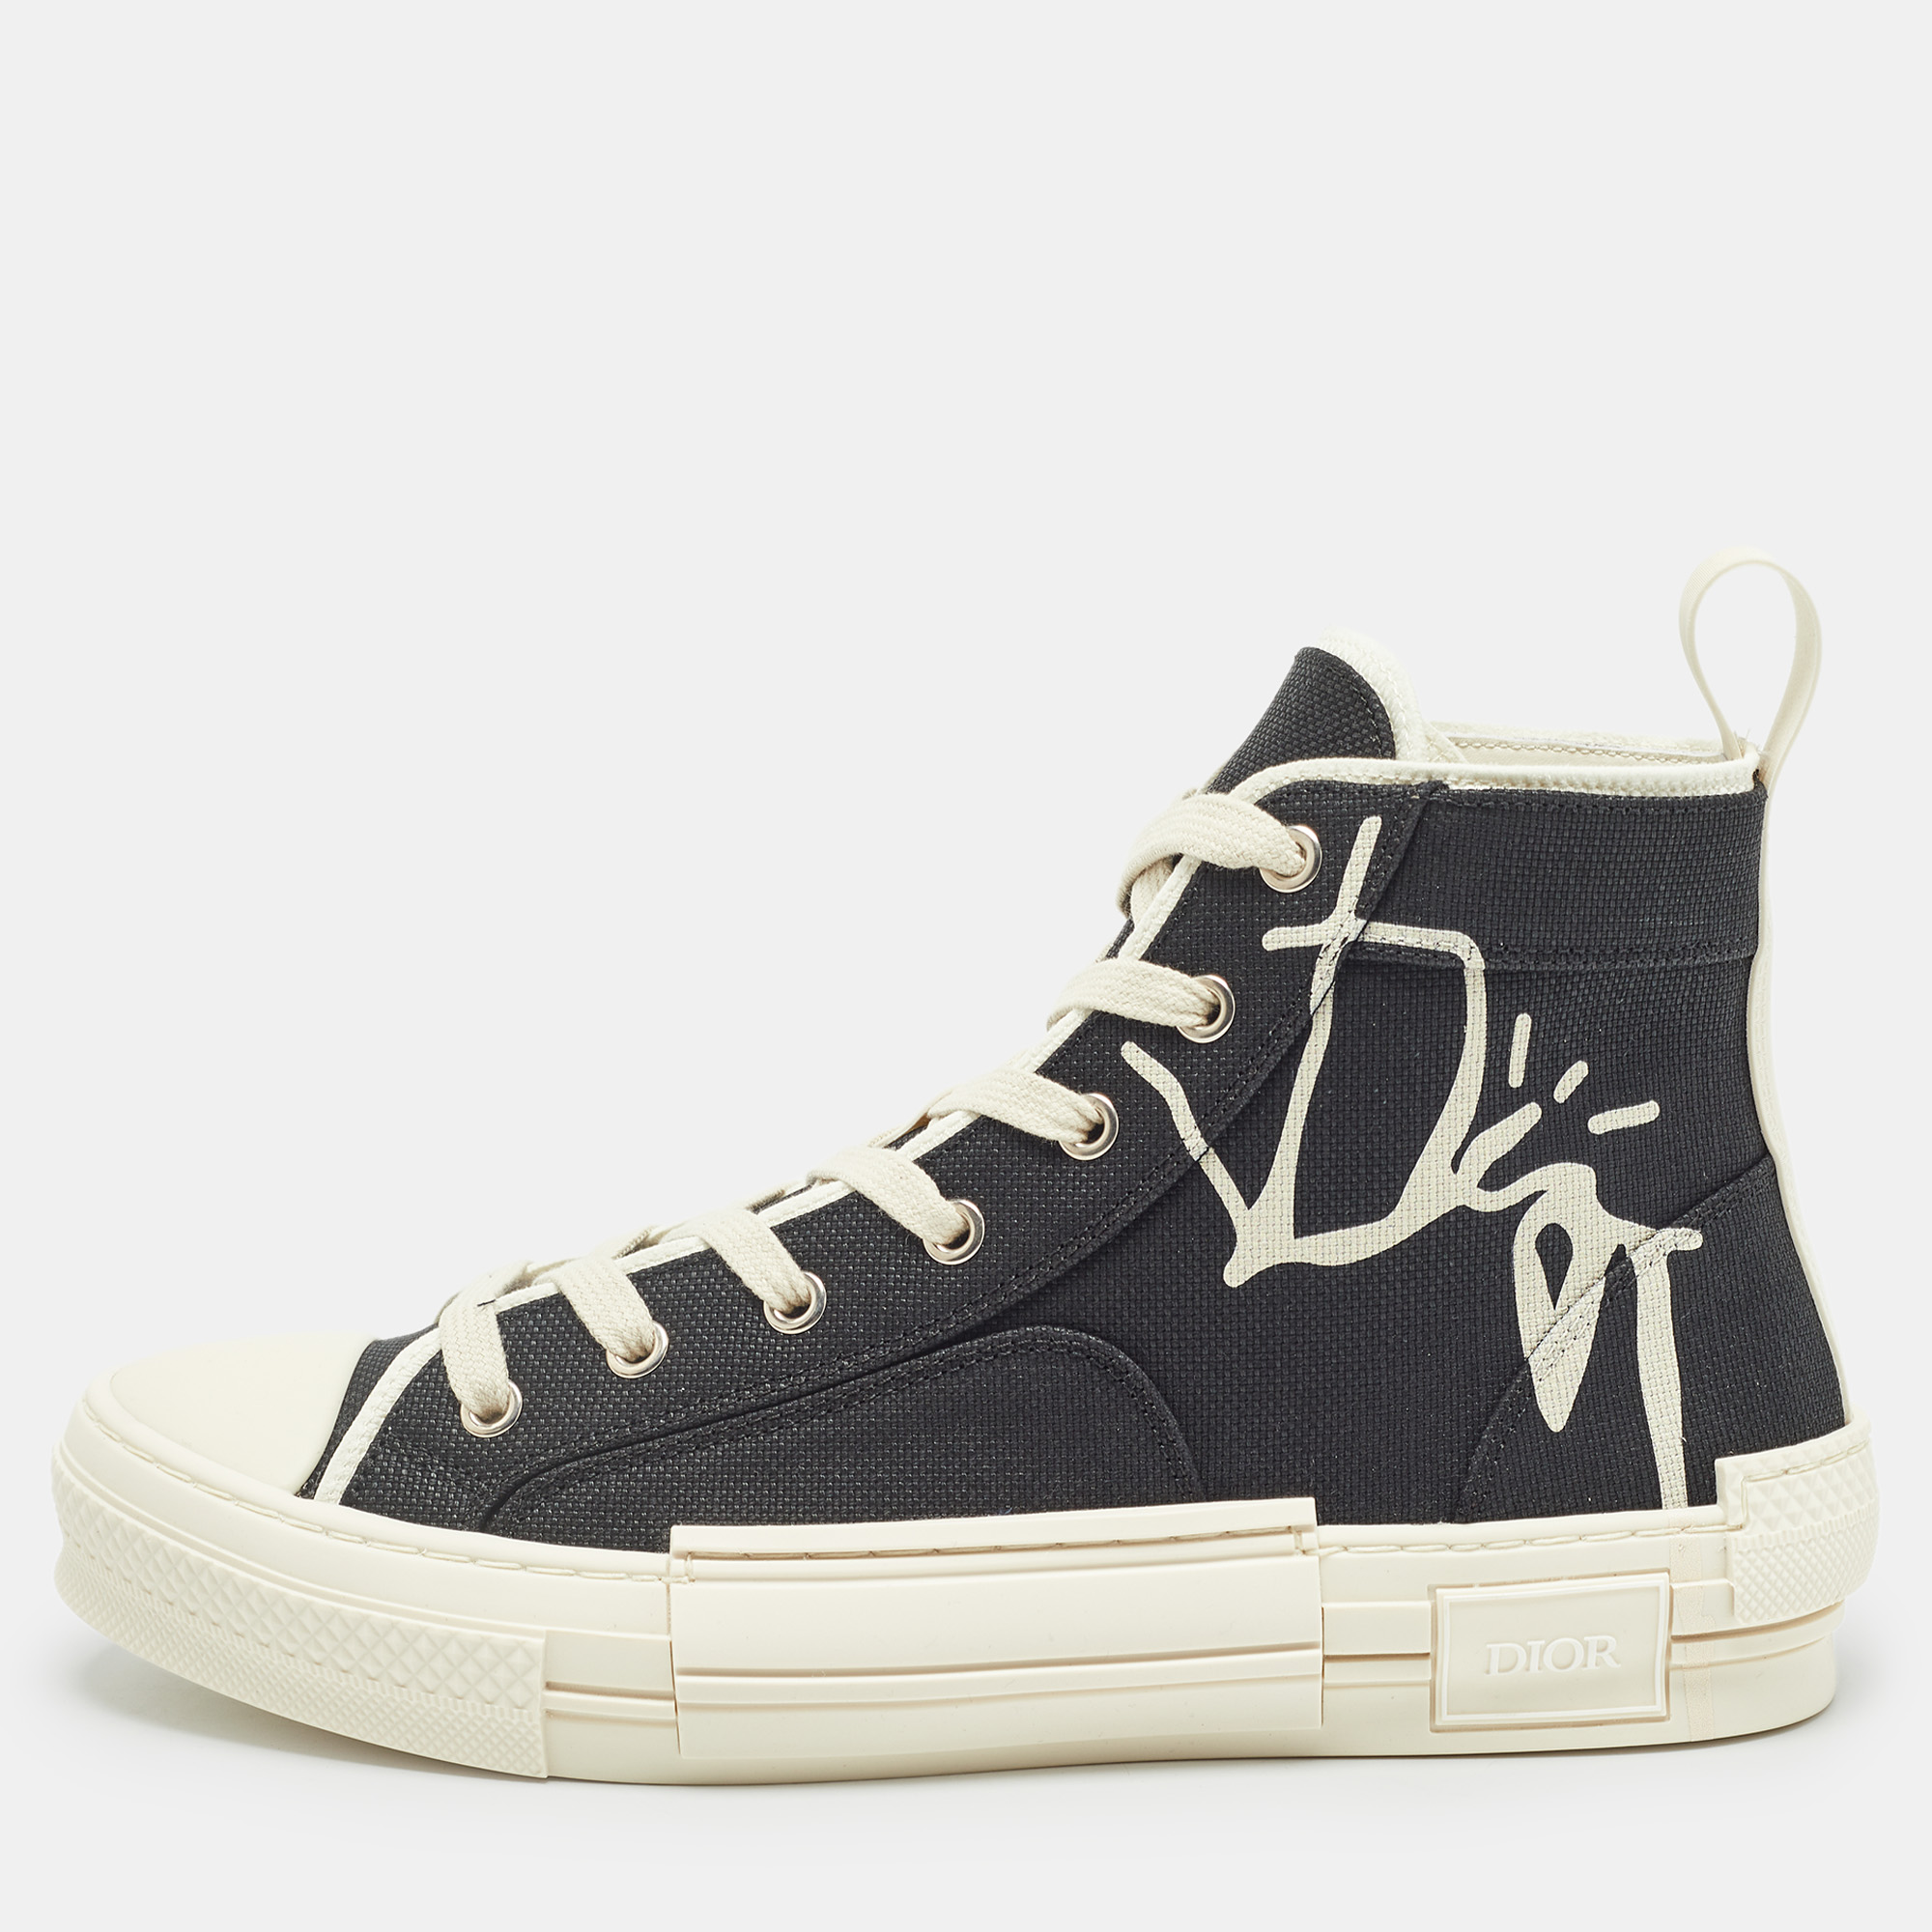 

Dior Black Canvas Jack B23 High Top Sneakers Size